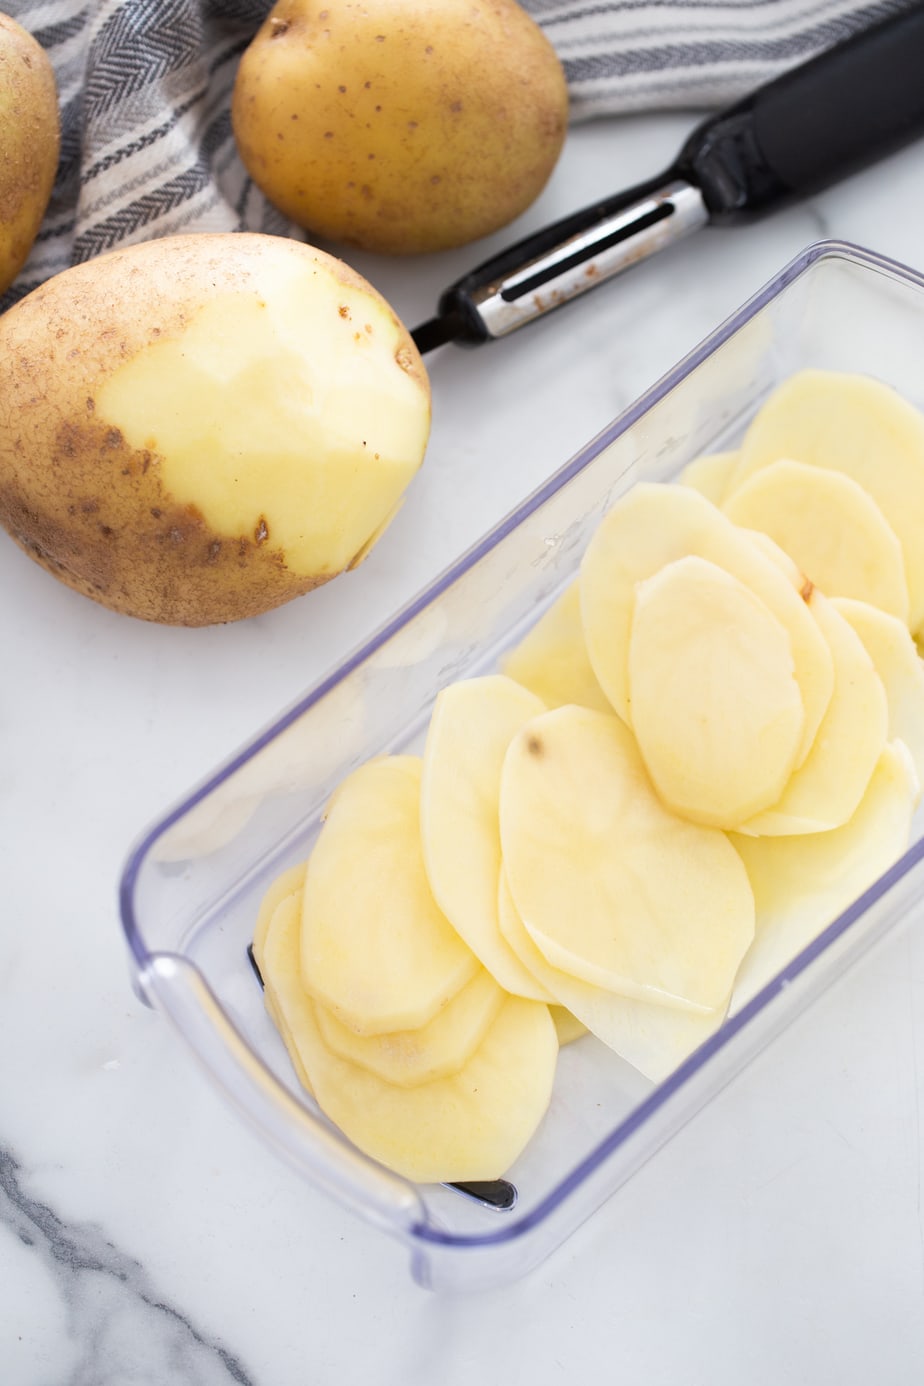 A potato is being peeled next to a glass container of sliced potatoes.